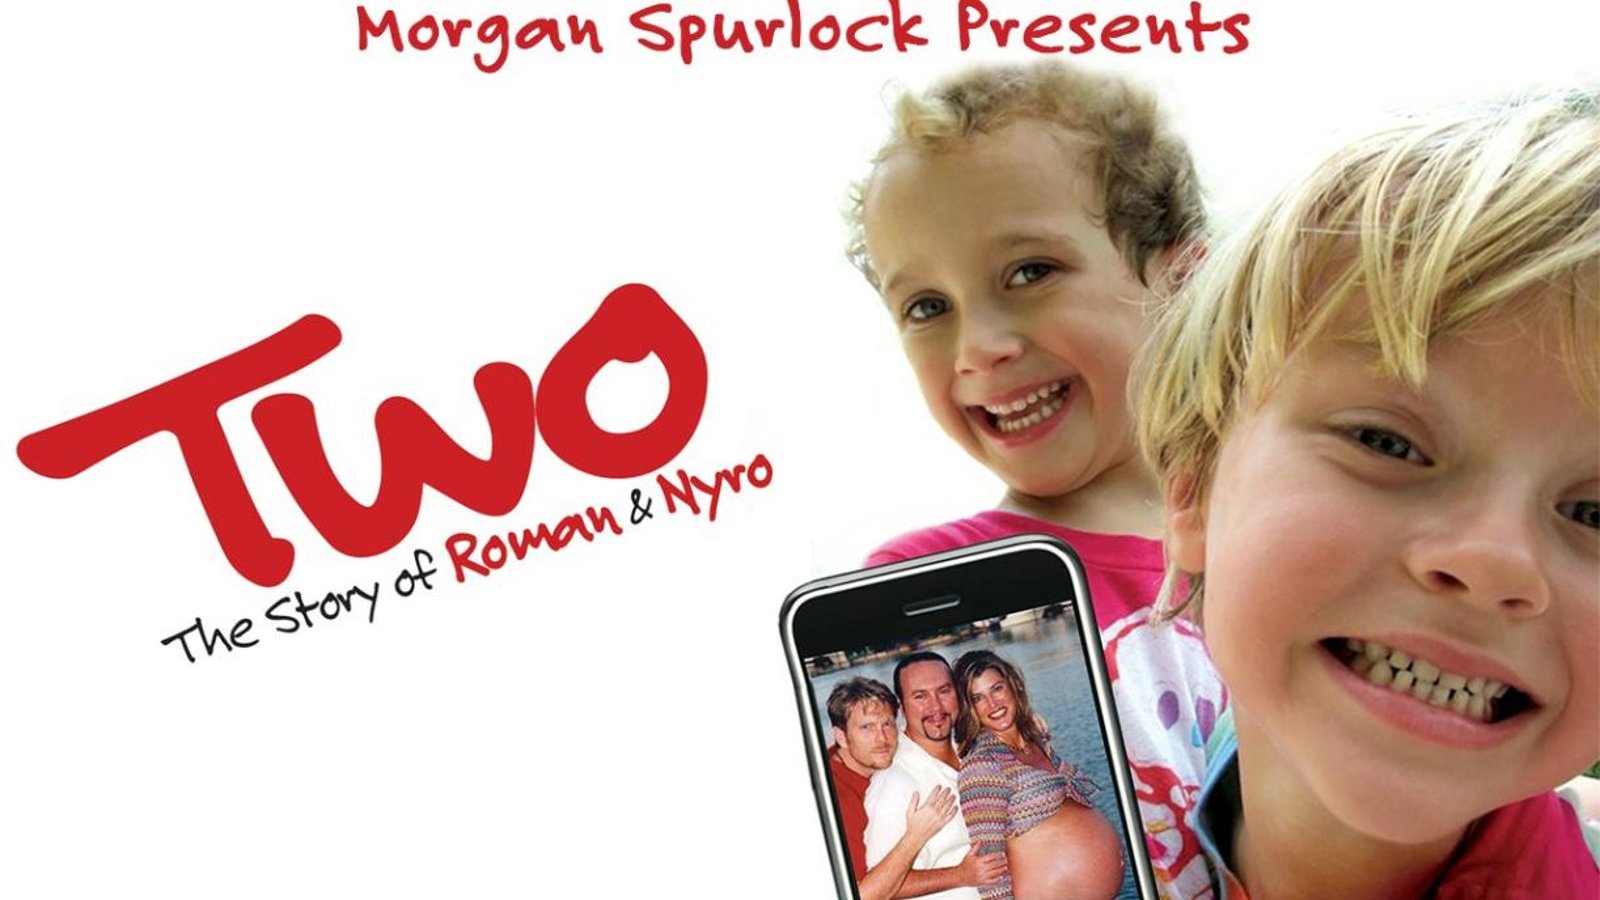 Two: The Story of Roman and Nyro - Legendary Songwriter Desmond Child